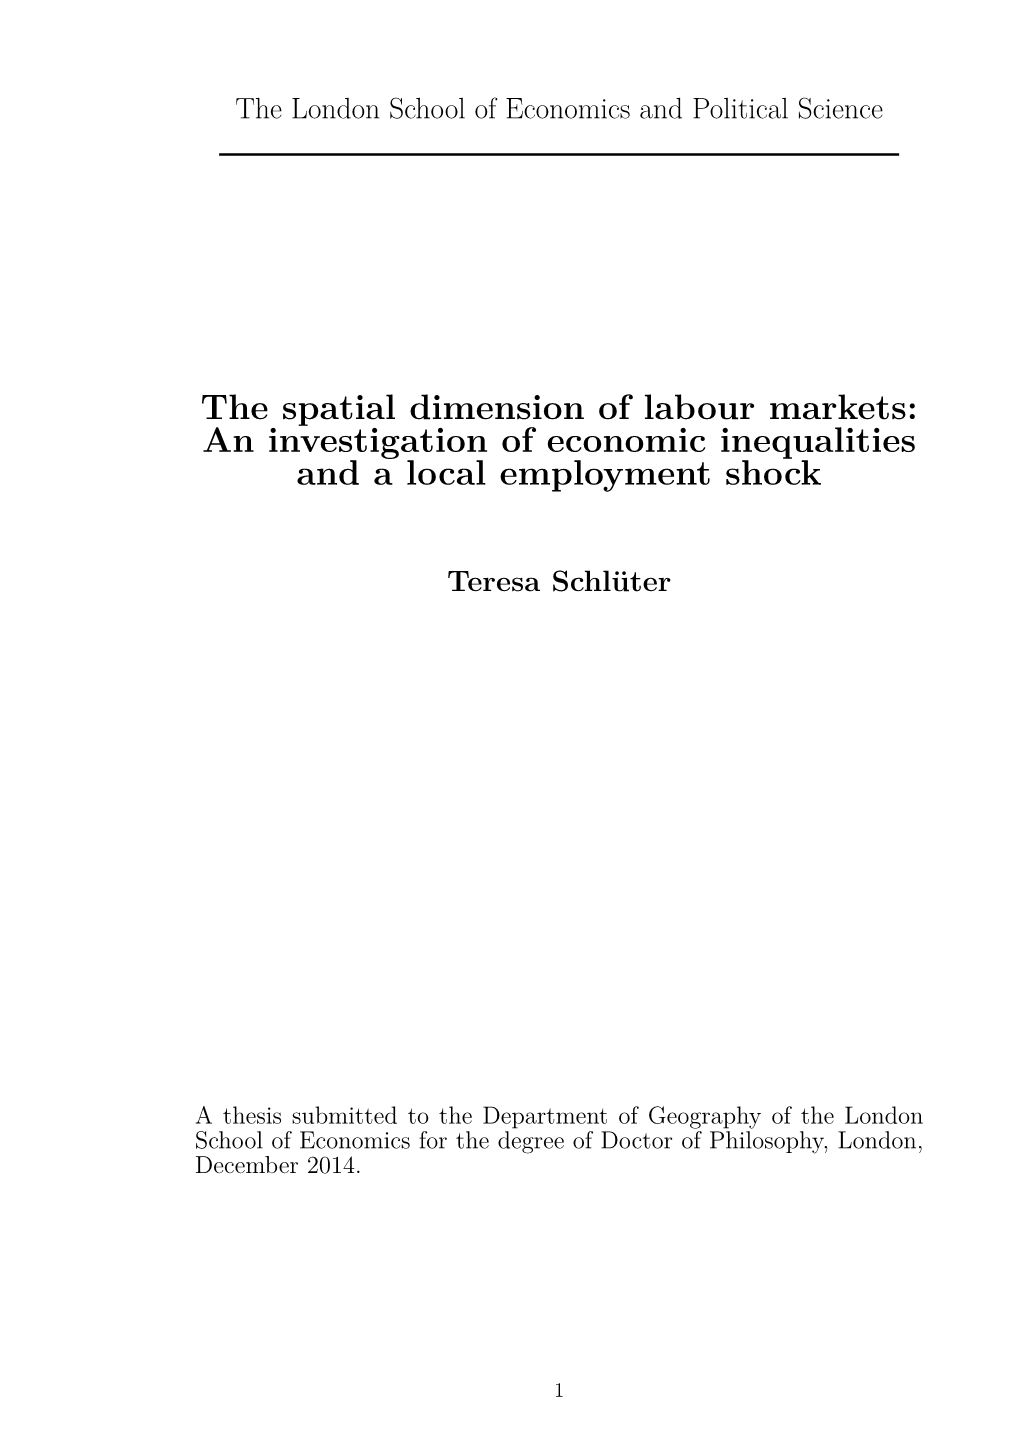 The Spatial Dimension of Labour Markets: an Investigation of Economic Inequalities and a Local Employment Shock